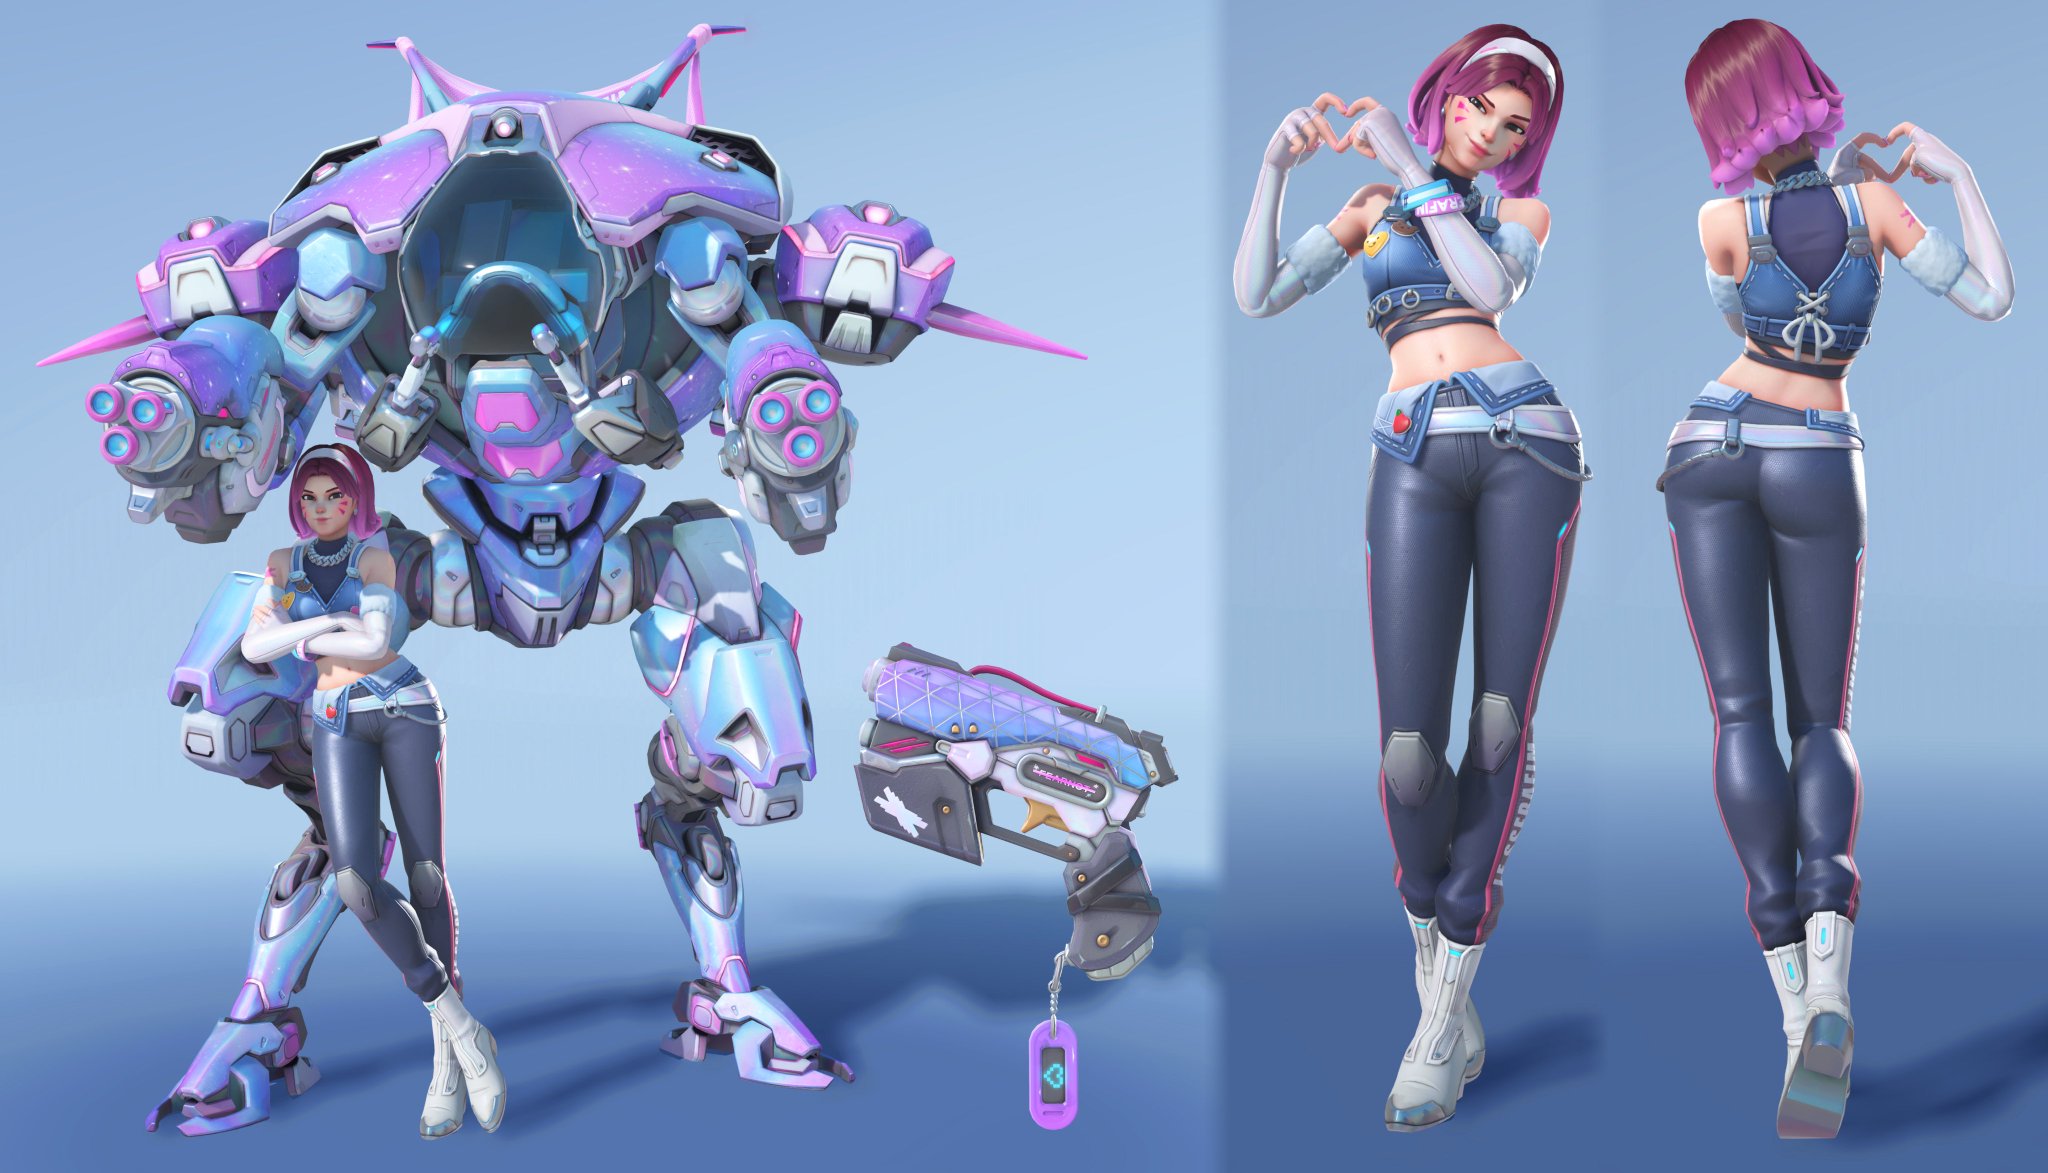 Naeri X 나에리 on X: OVERWATCH 2 NEW SKIN SYNTHWAVE TRACER 🏍️ he skin suit  has a neon sign ✨  / X